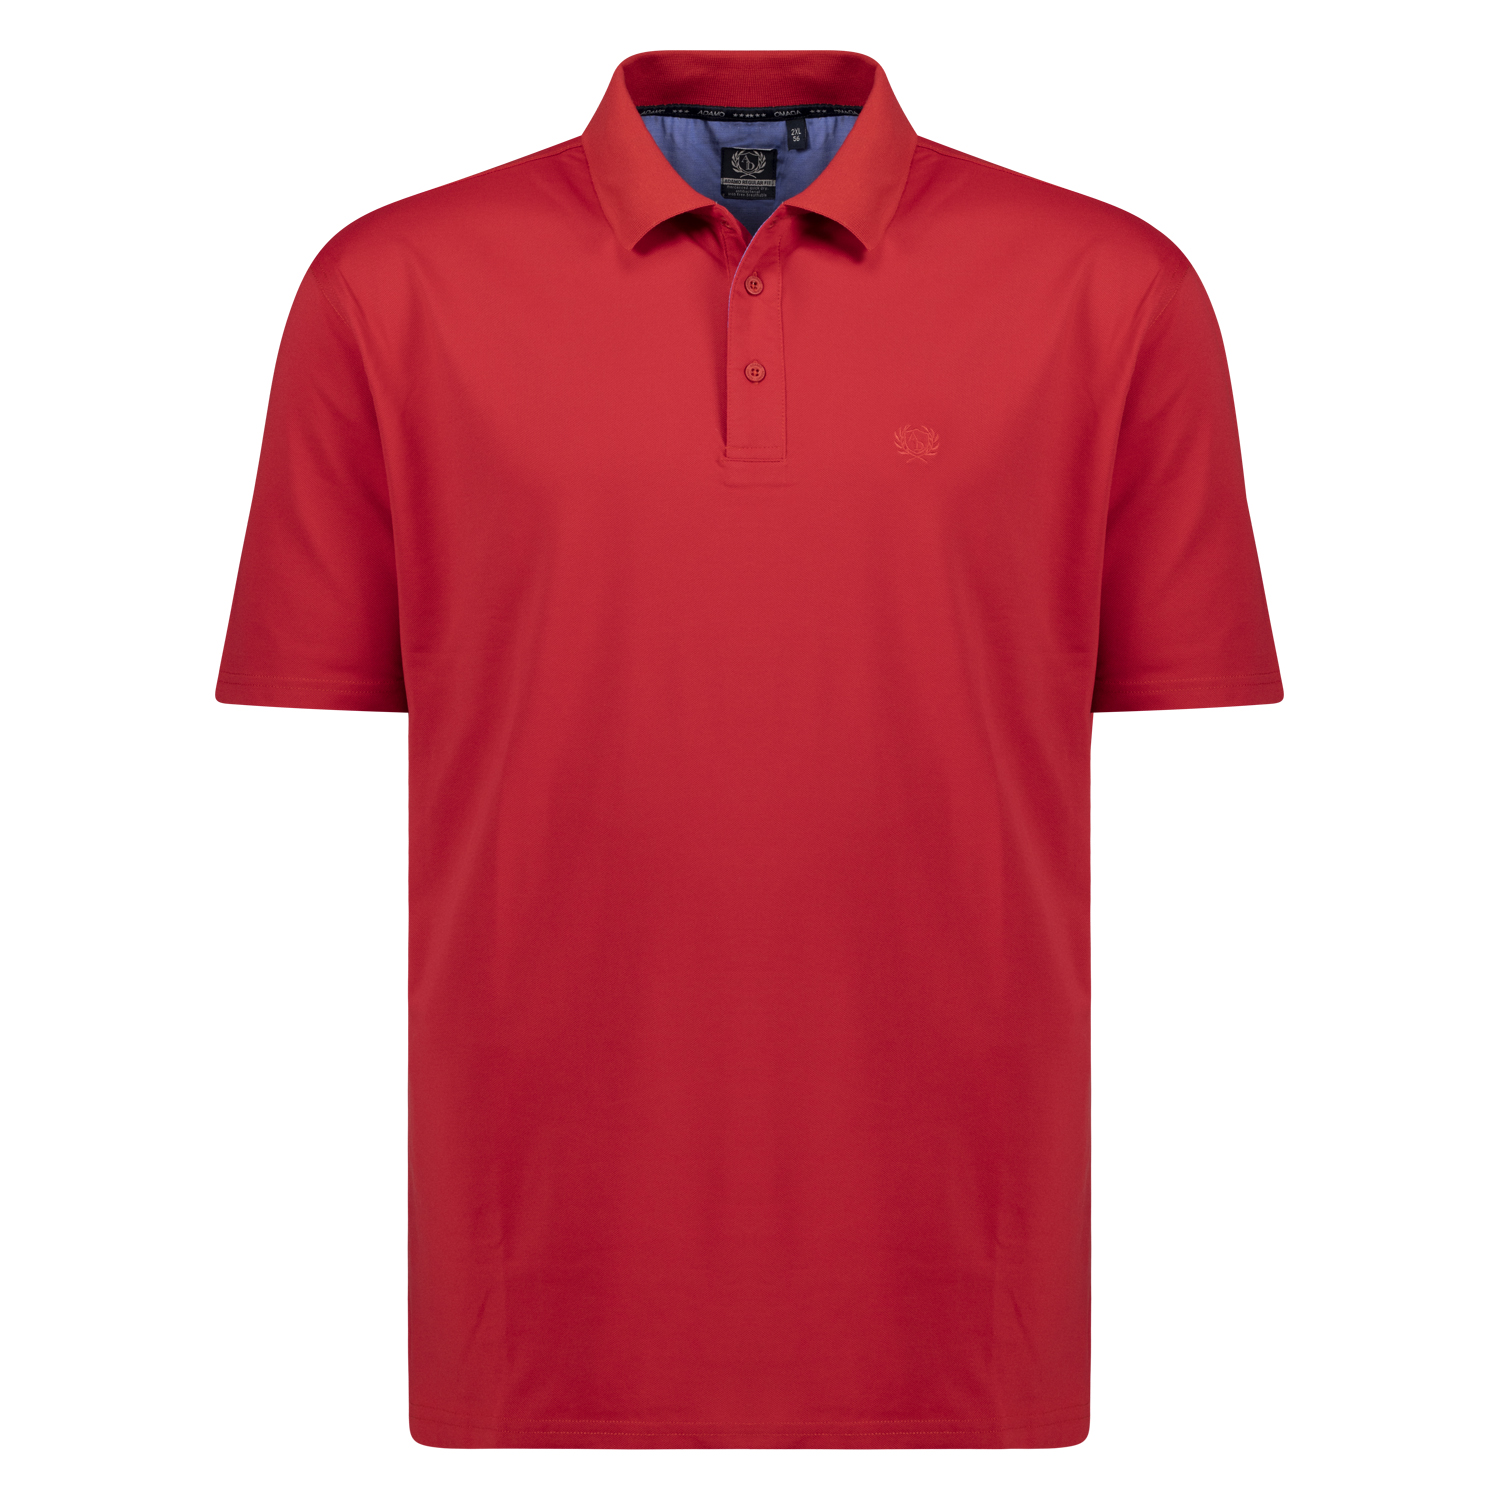 Red short sleeve polo shirt PICCO by ADAMO for men in large sizes up to 12XL